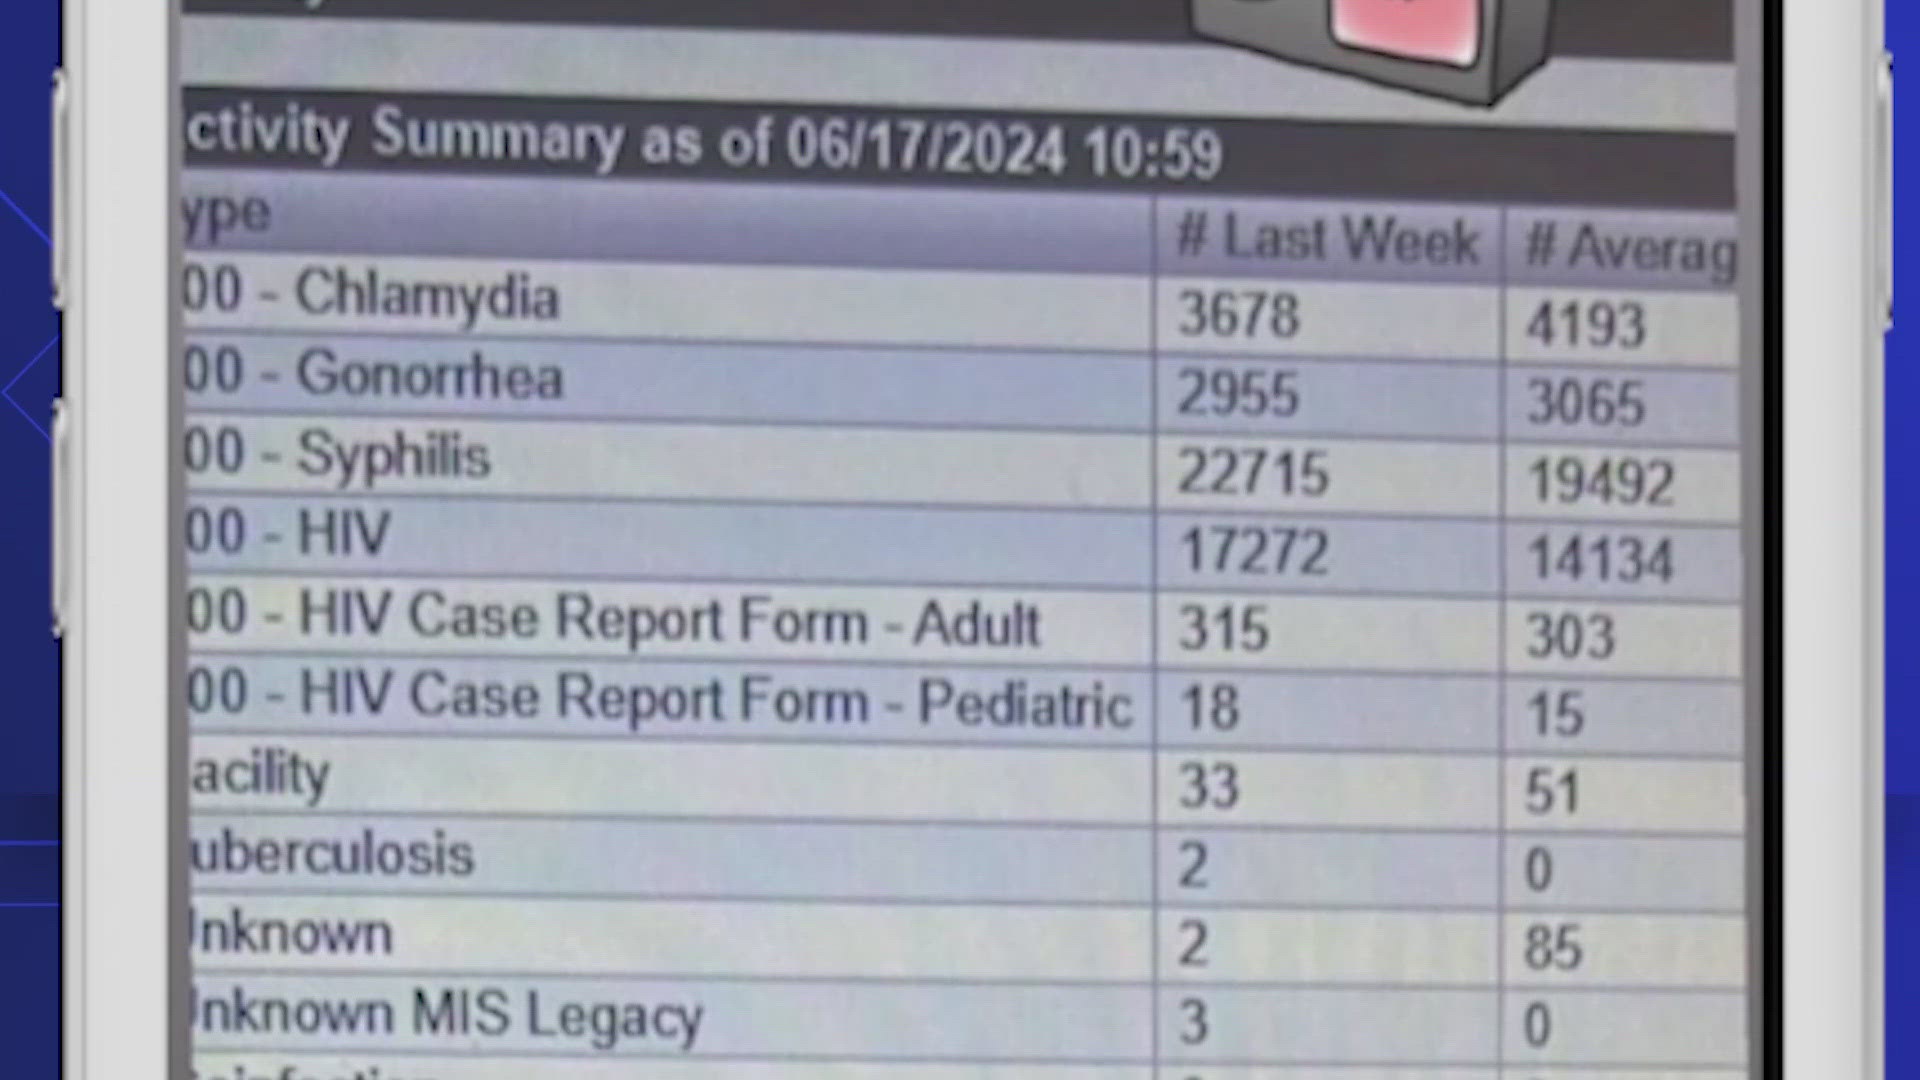 The health department said a “violation of its policies” resulted in an image being shared that falsely claims thousands of Houstonians were diagnosed with STDs.